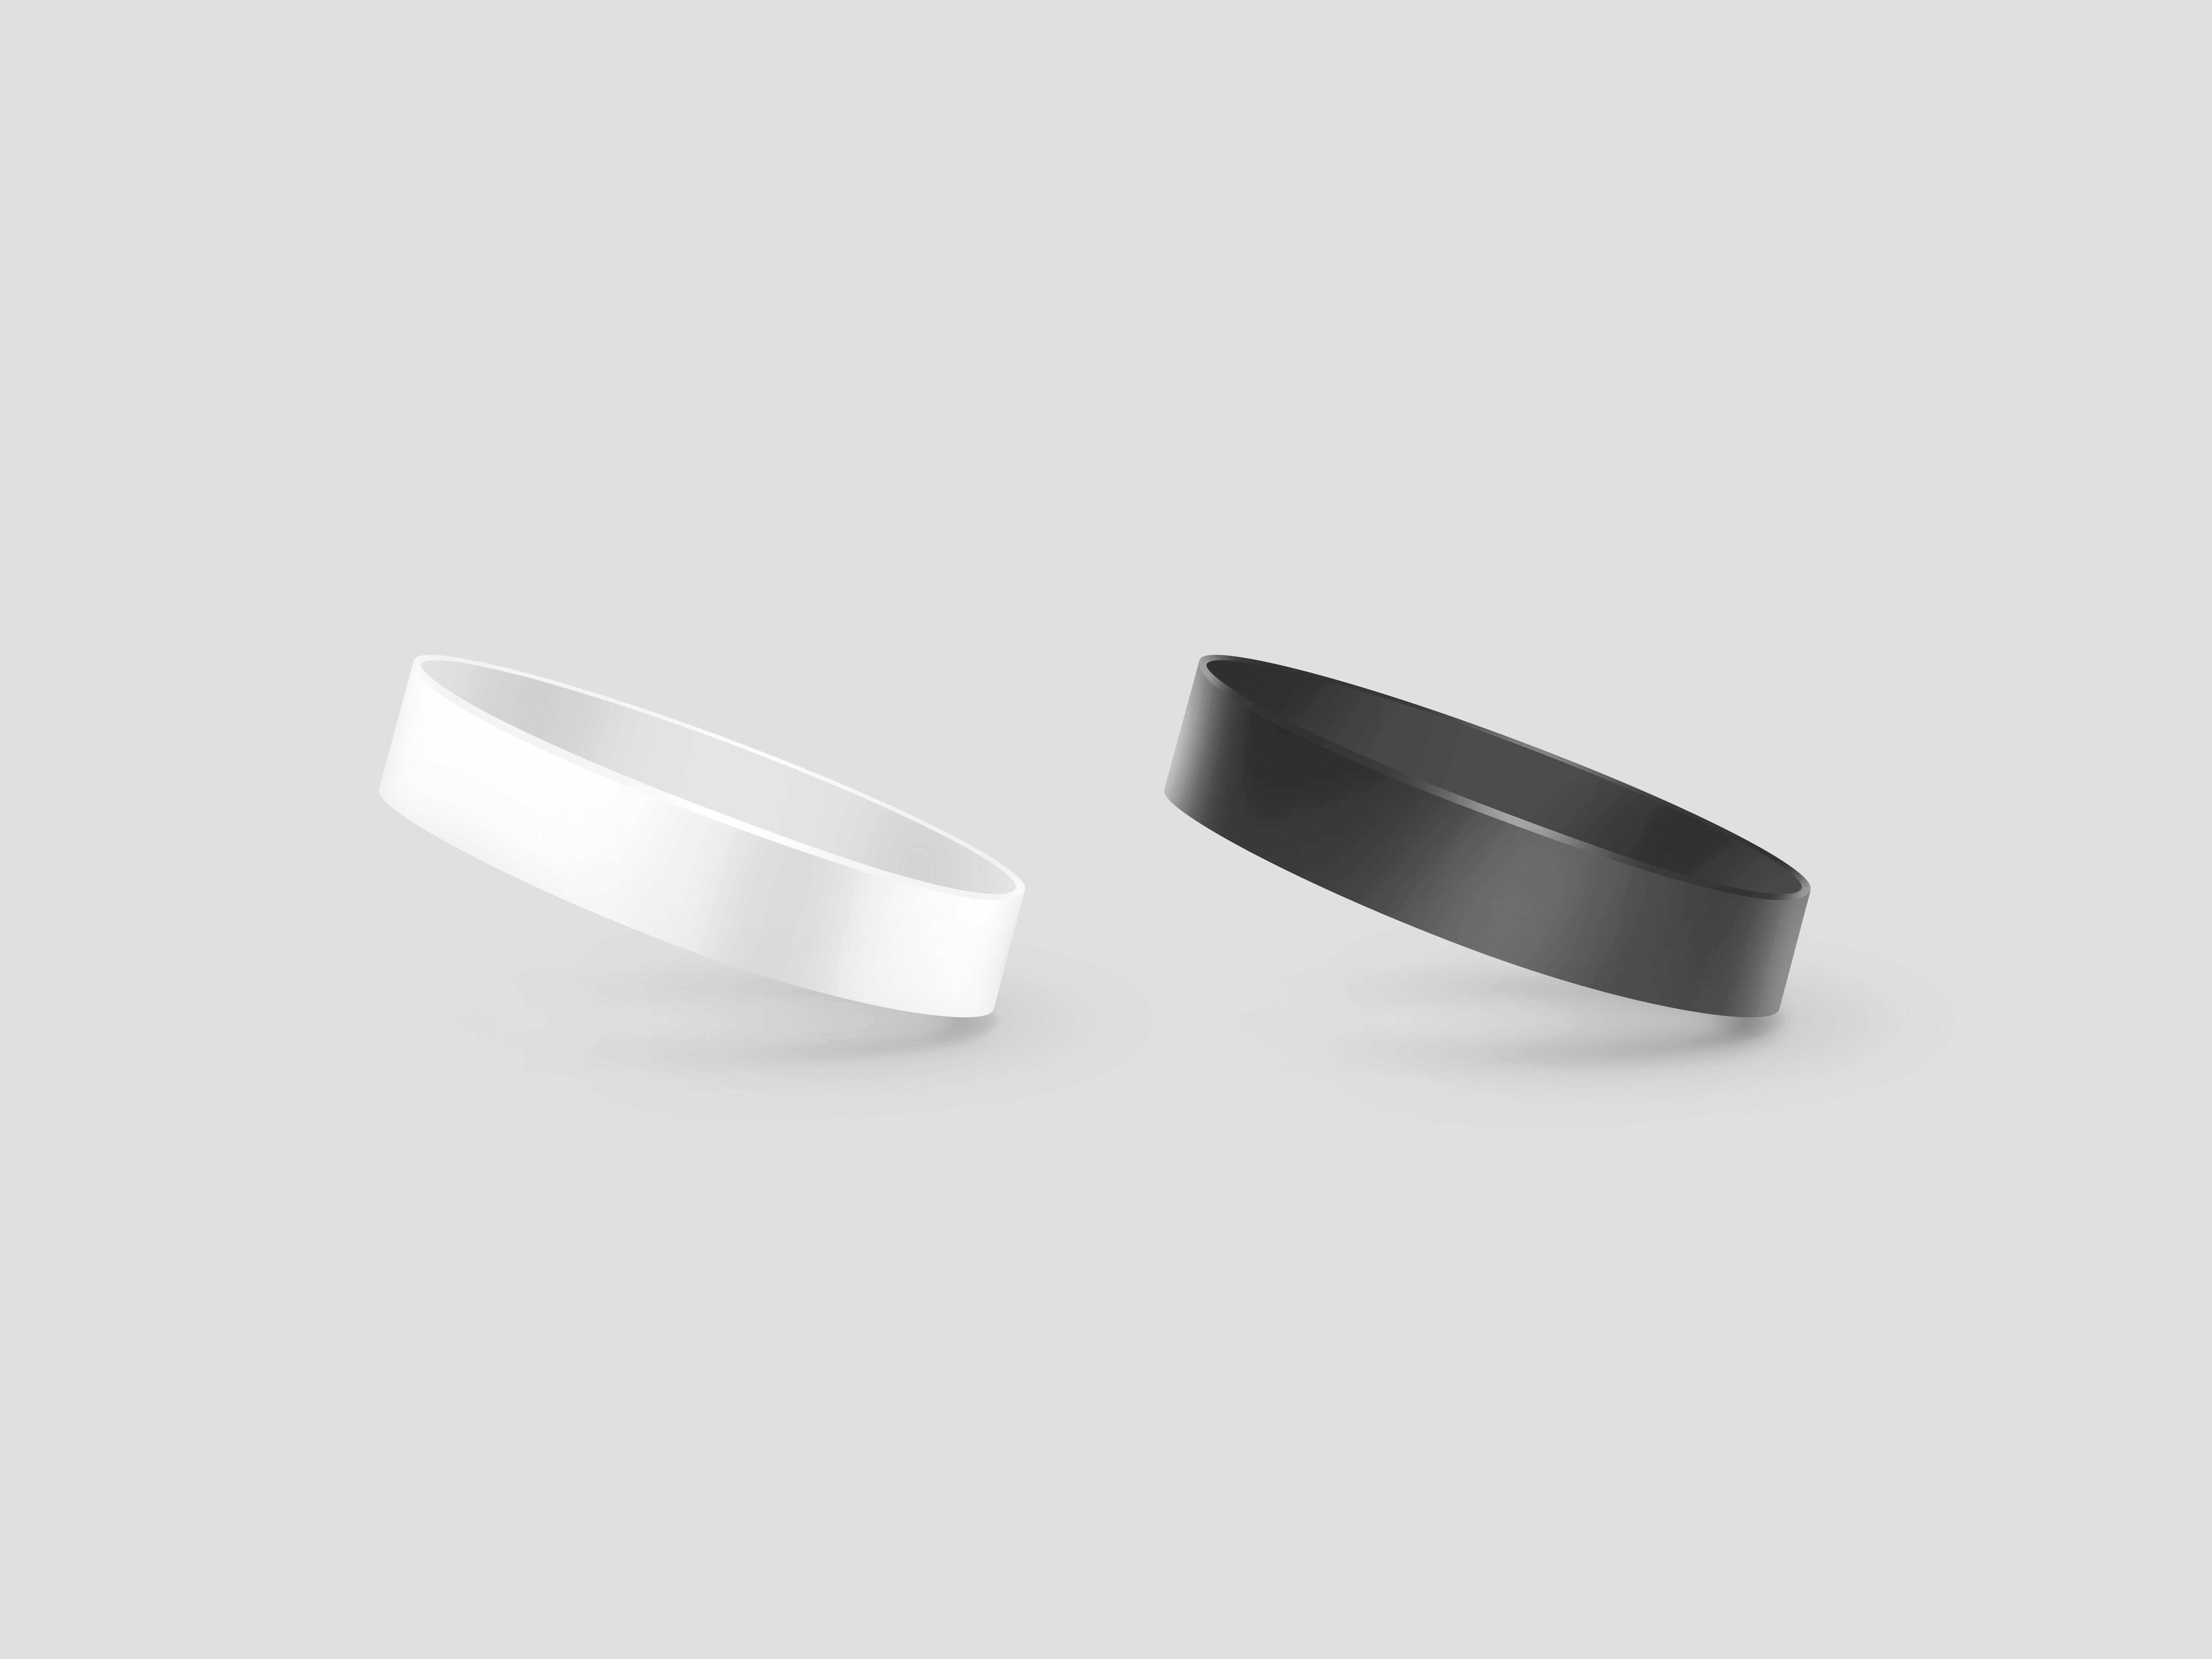 Sizing up or Down a Silicone Ring